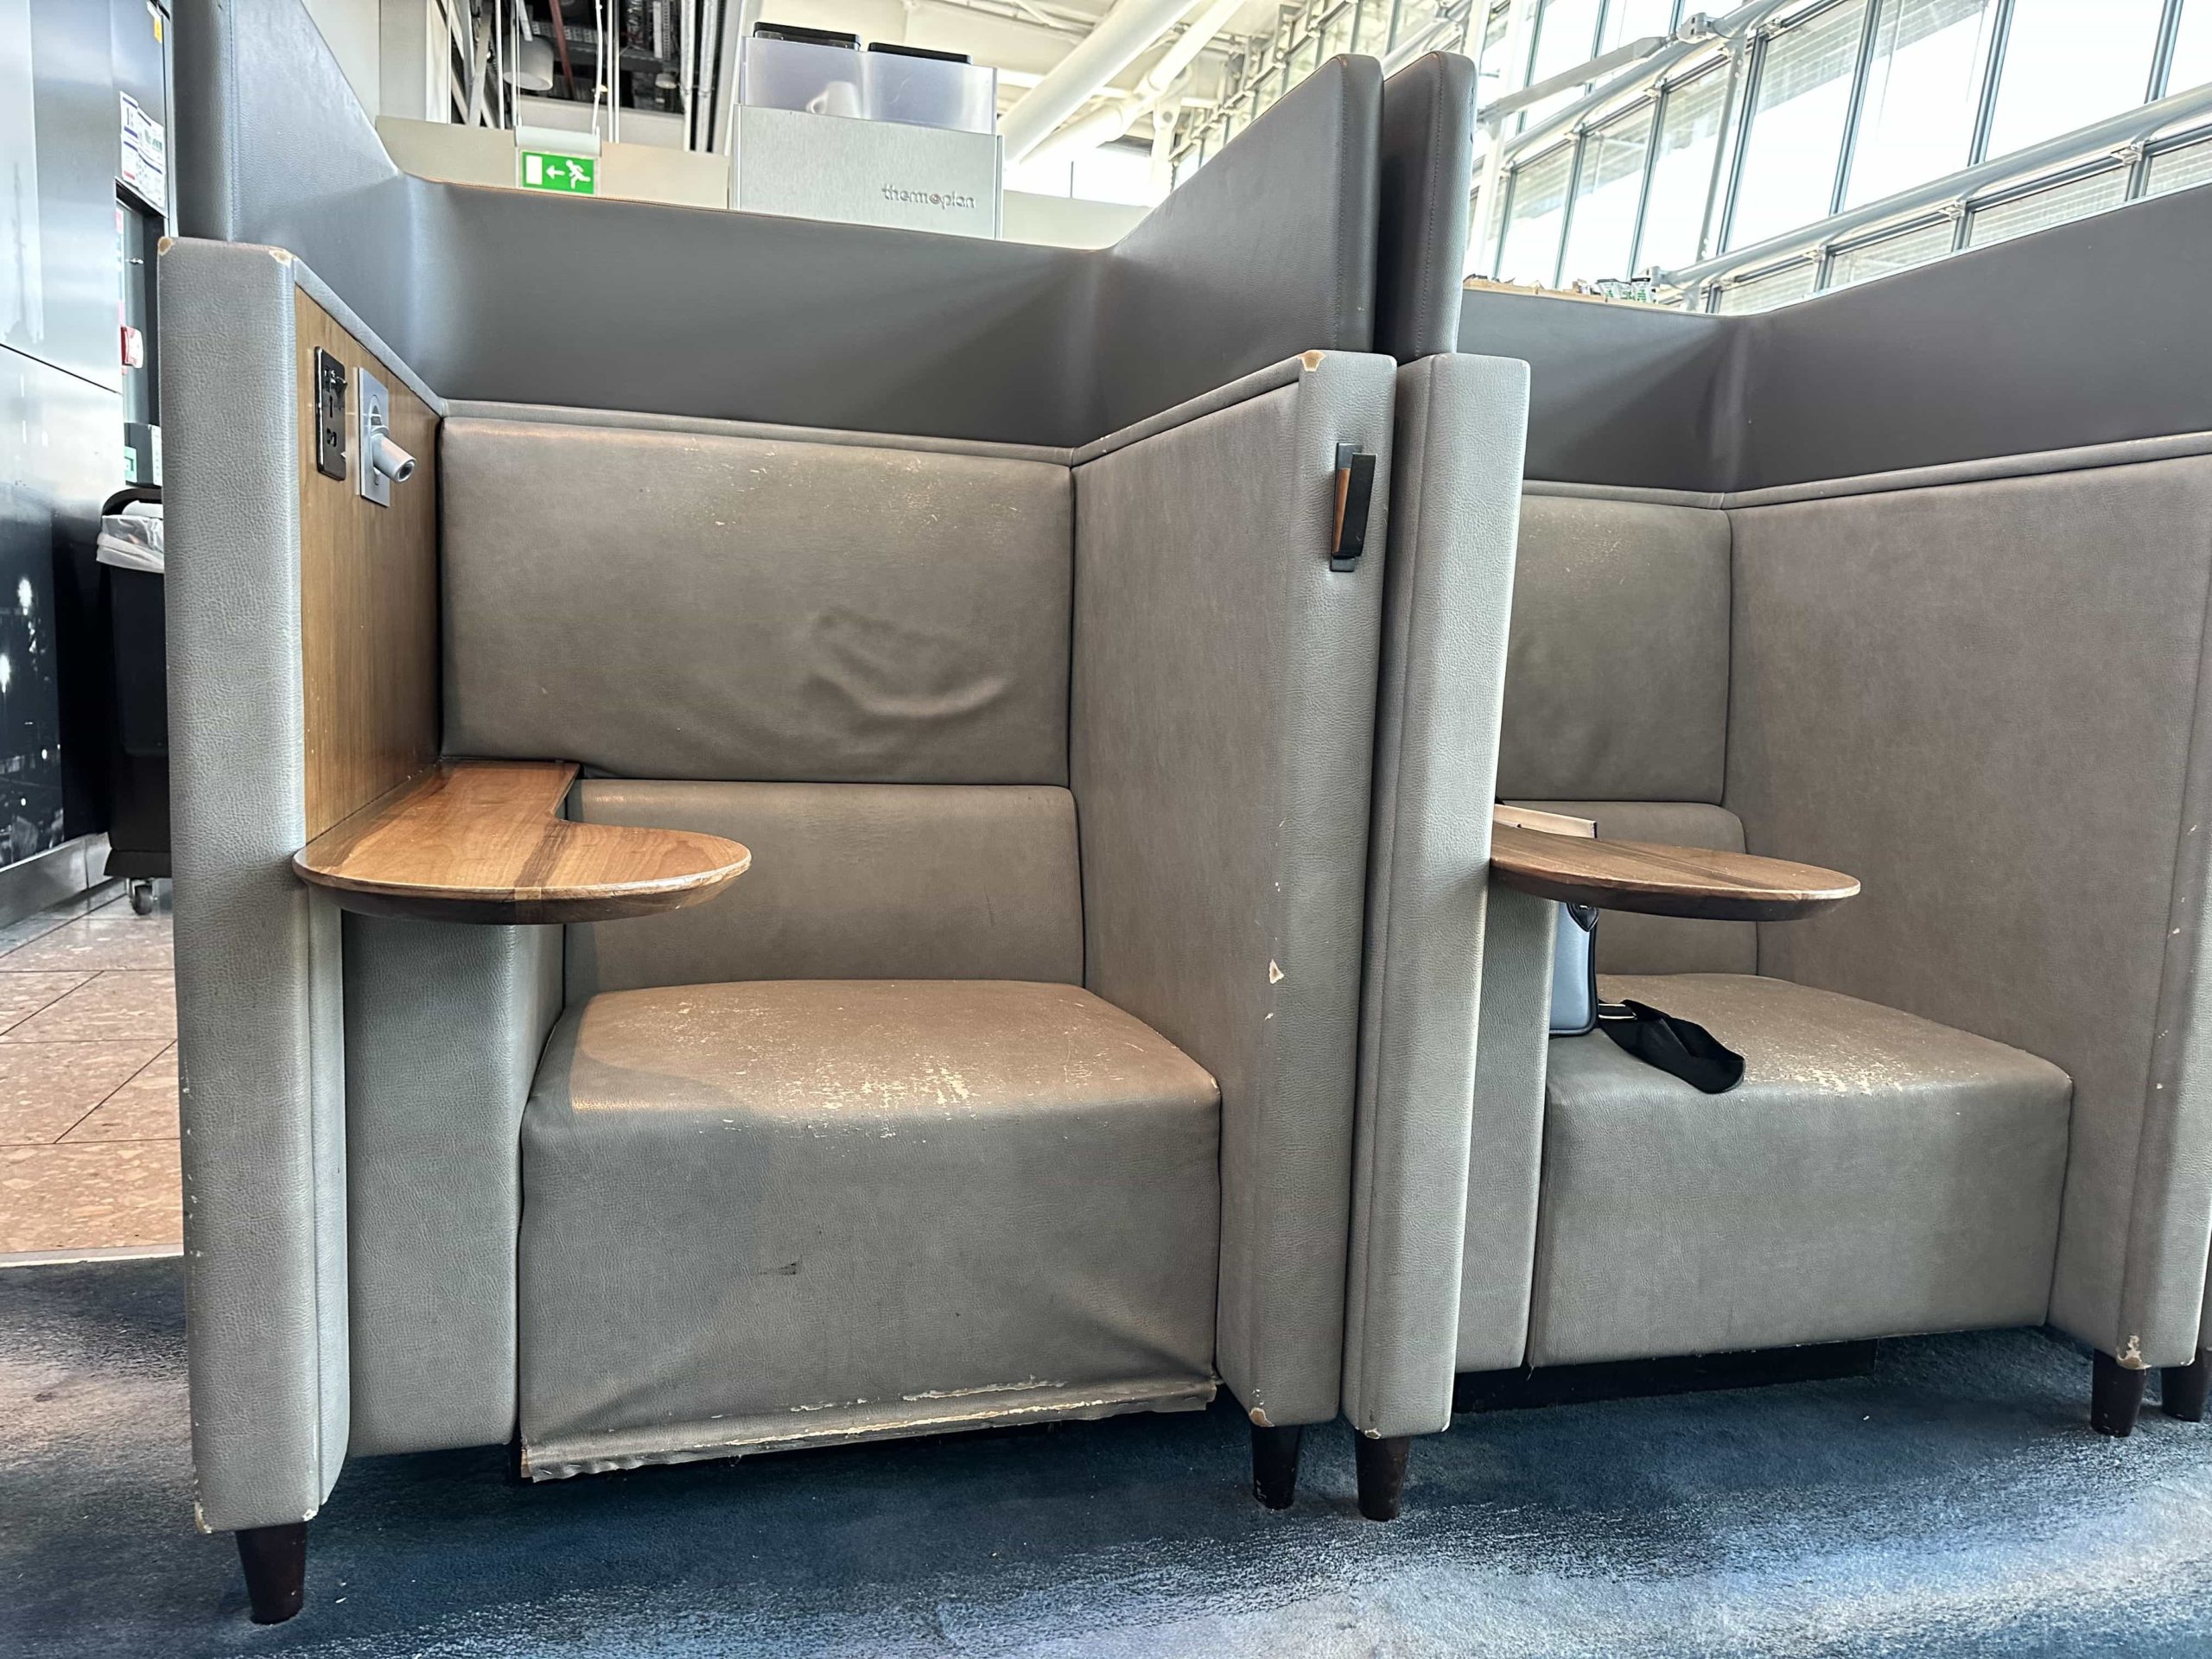 Two booth seats, side-by-side in an airport lounge